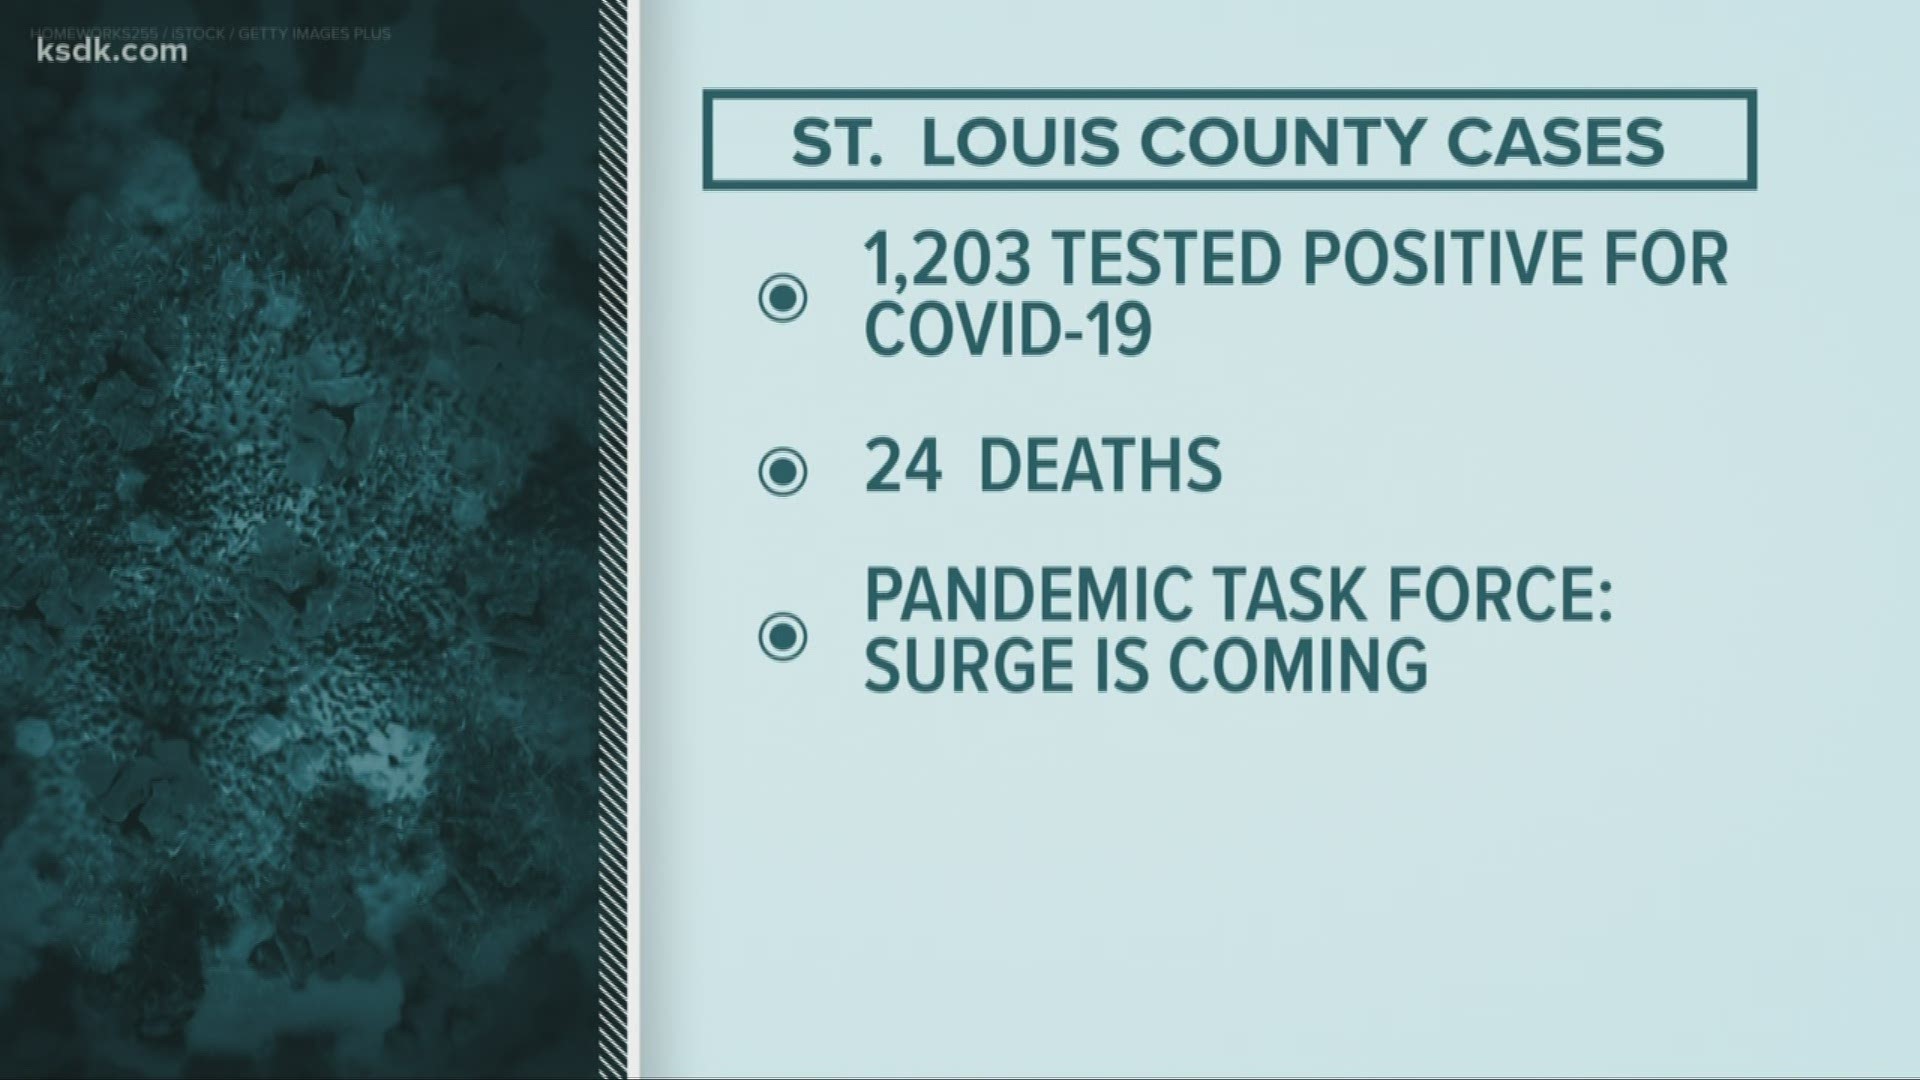 The latest news on the COVID-19 pandemic from our 6 p.m. newscast on Tuesday, April 7